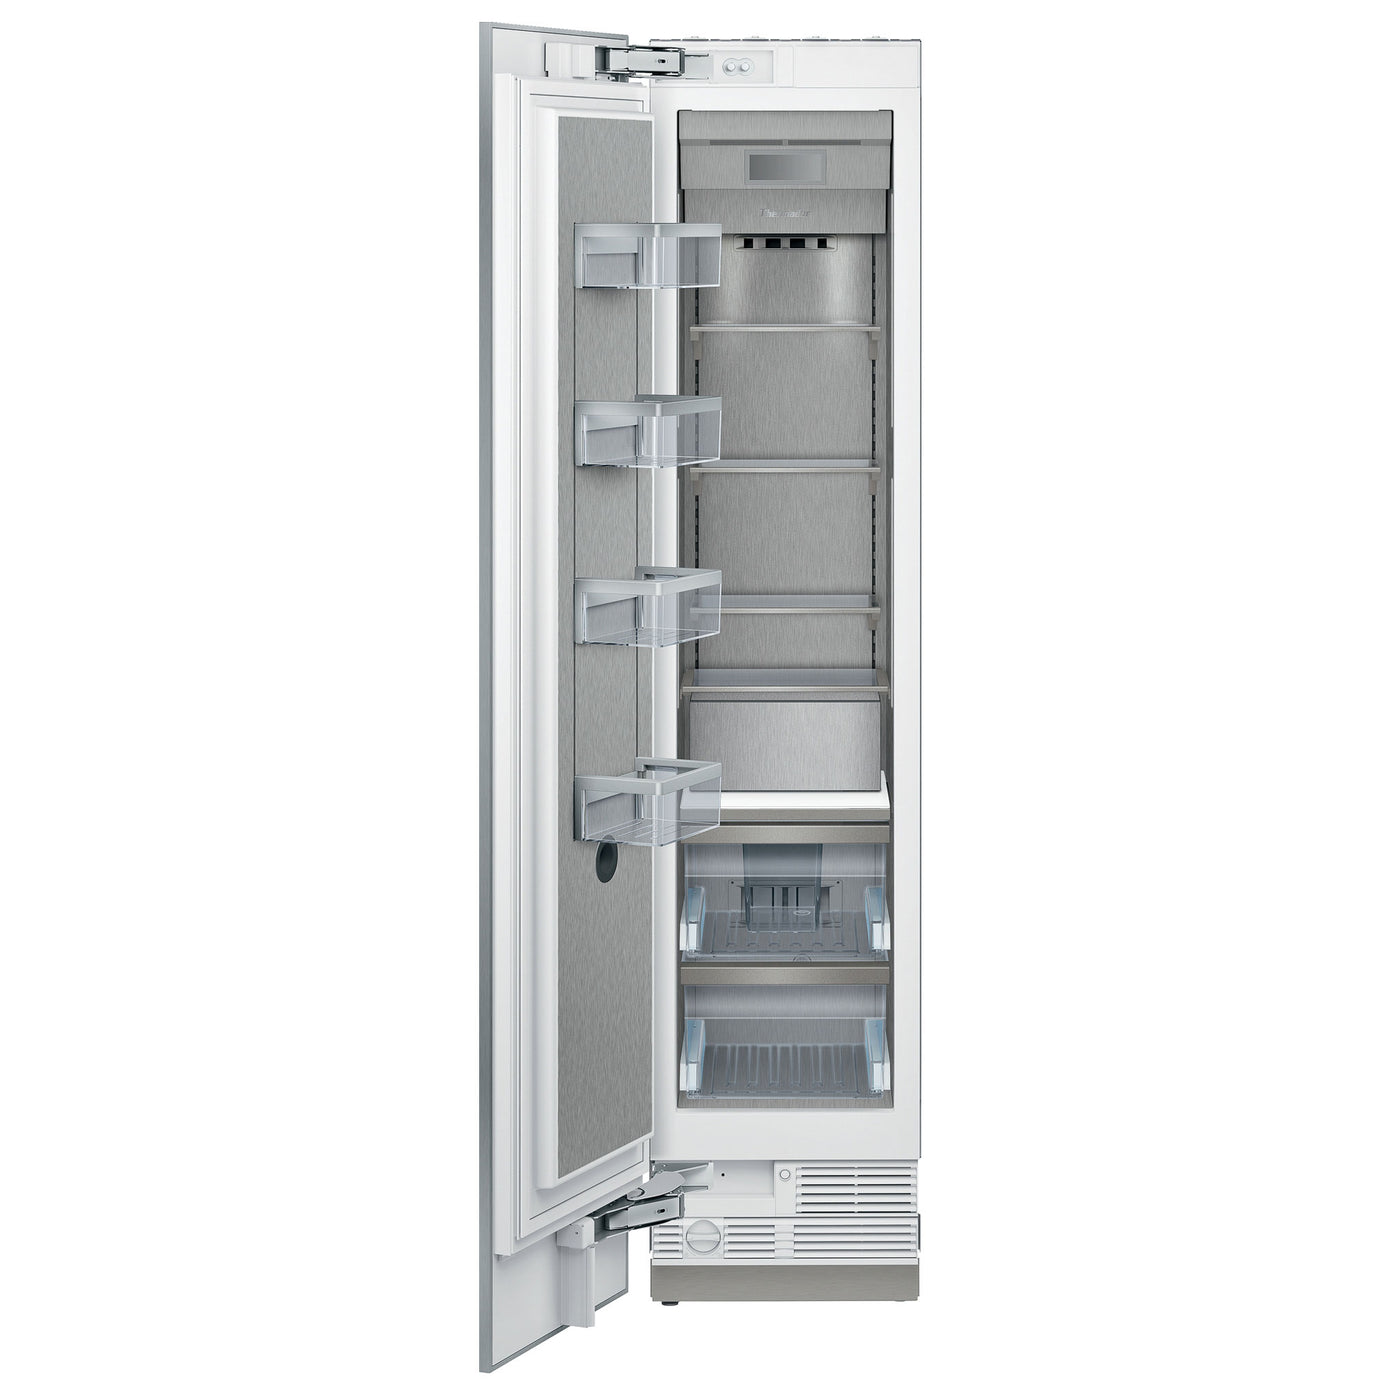 T18IF905SP panel-ready built-in column freezer